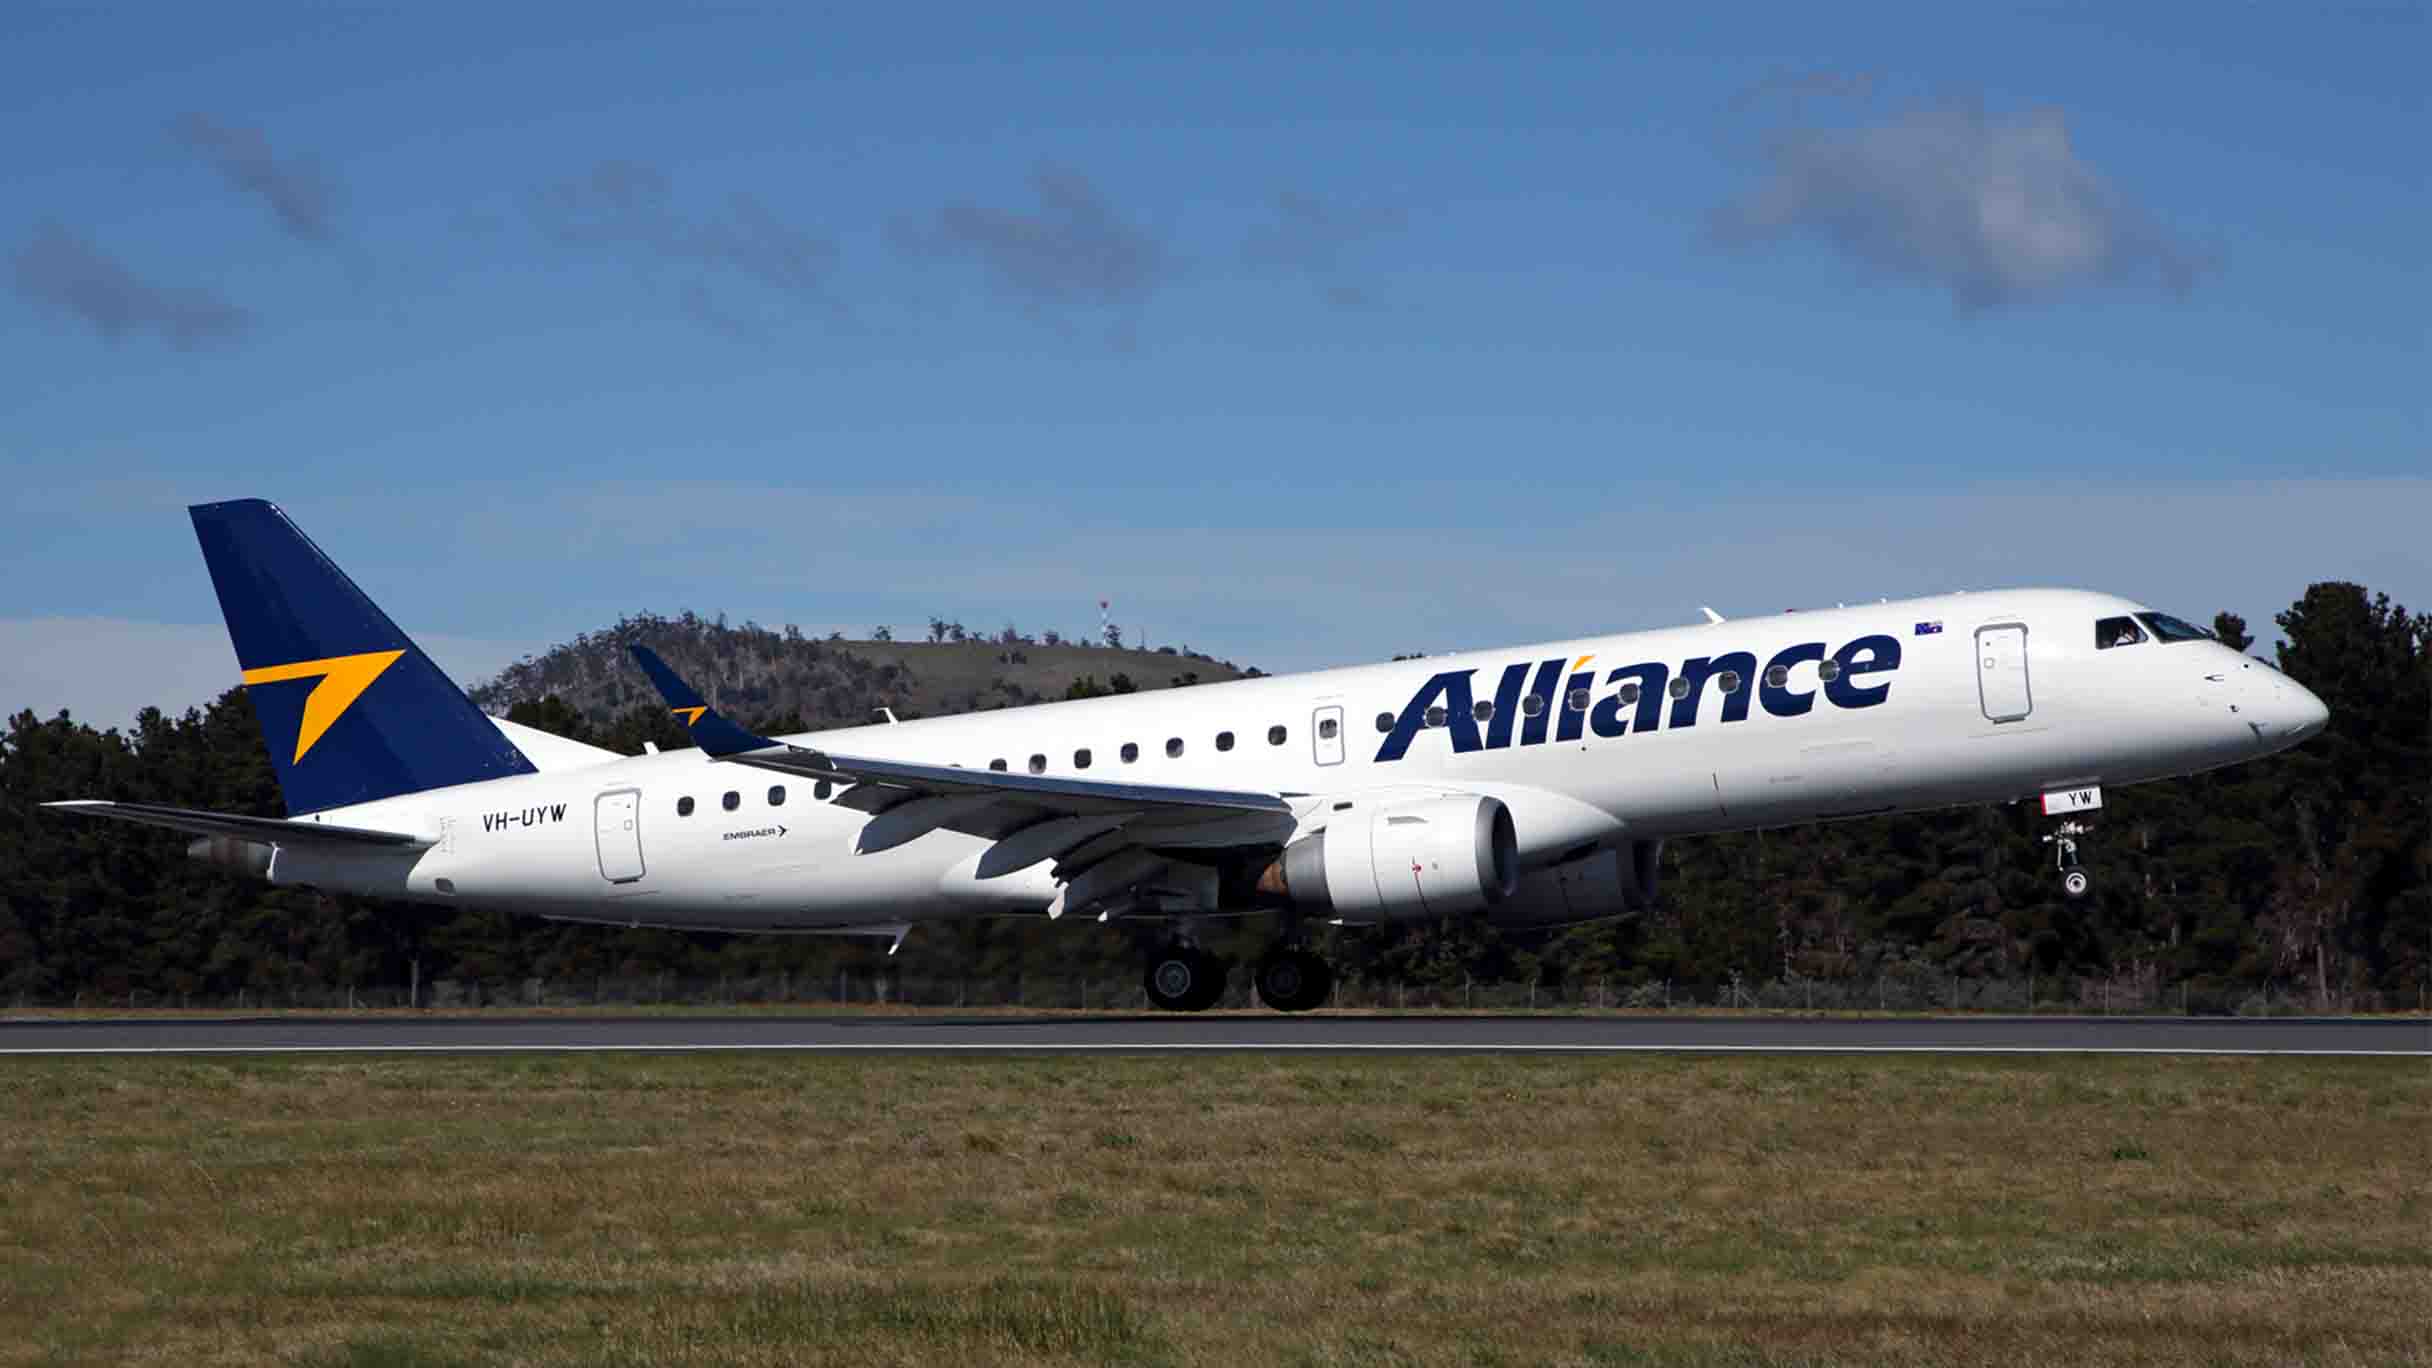 Alliance Airlines uses fuel efficiency software from GE Digital